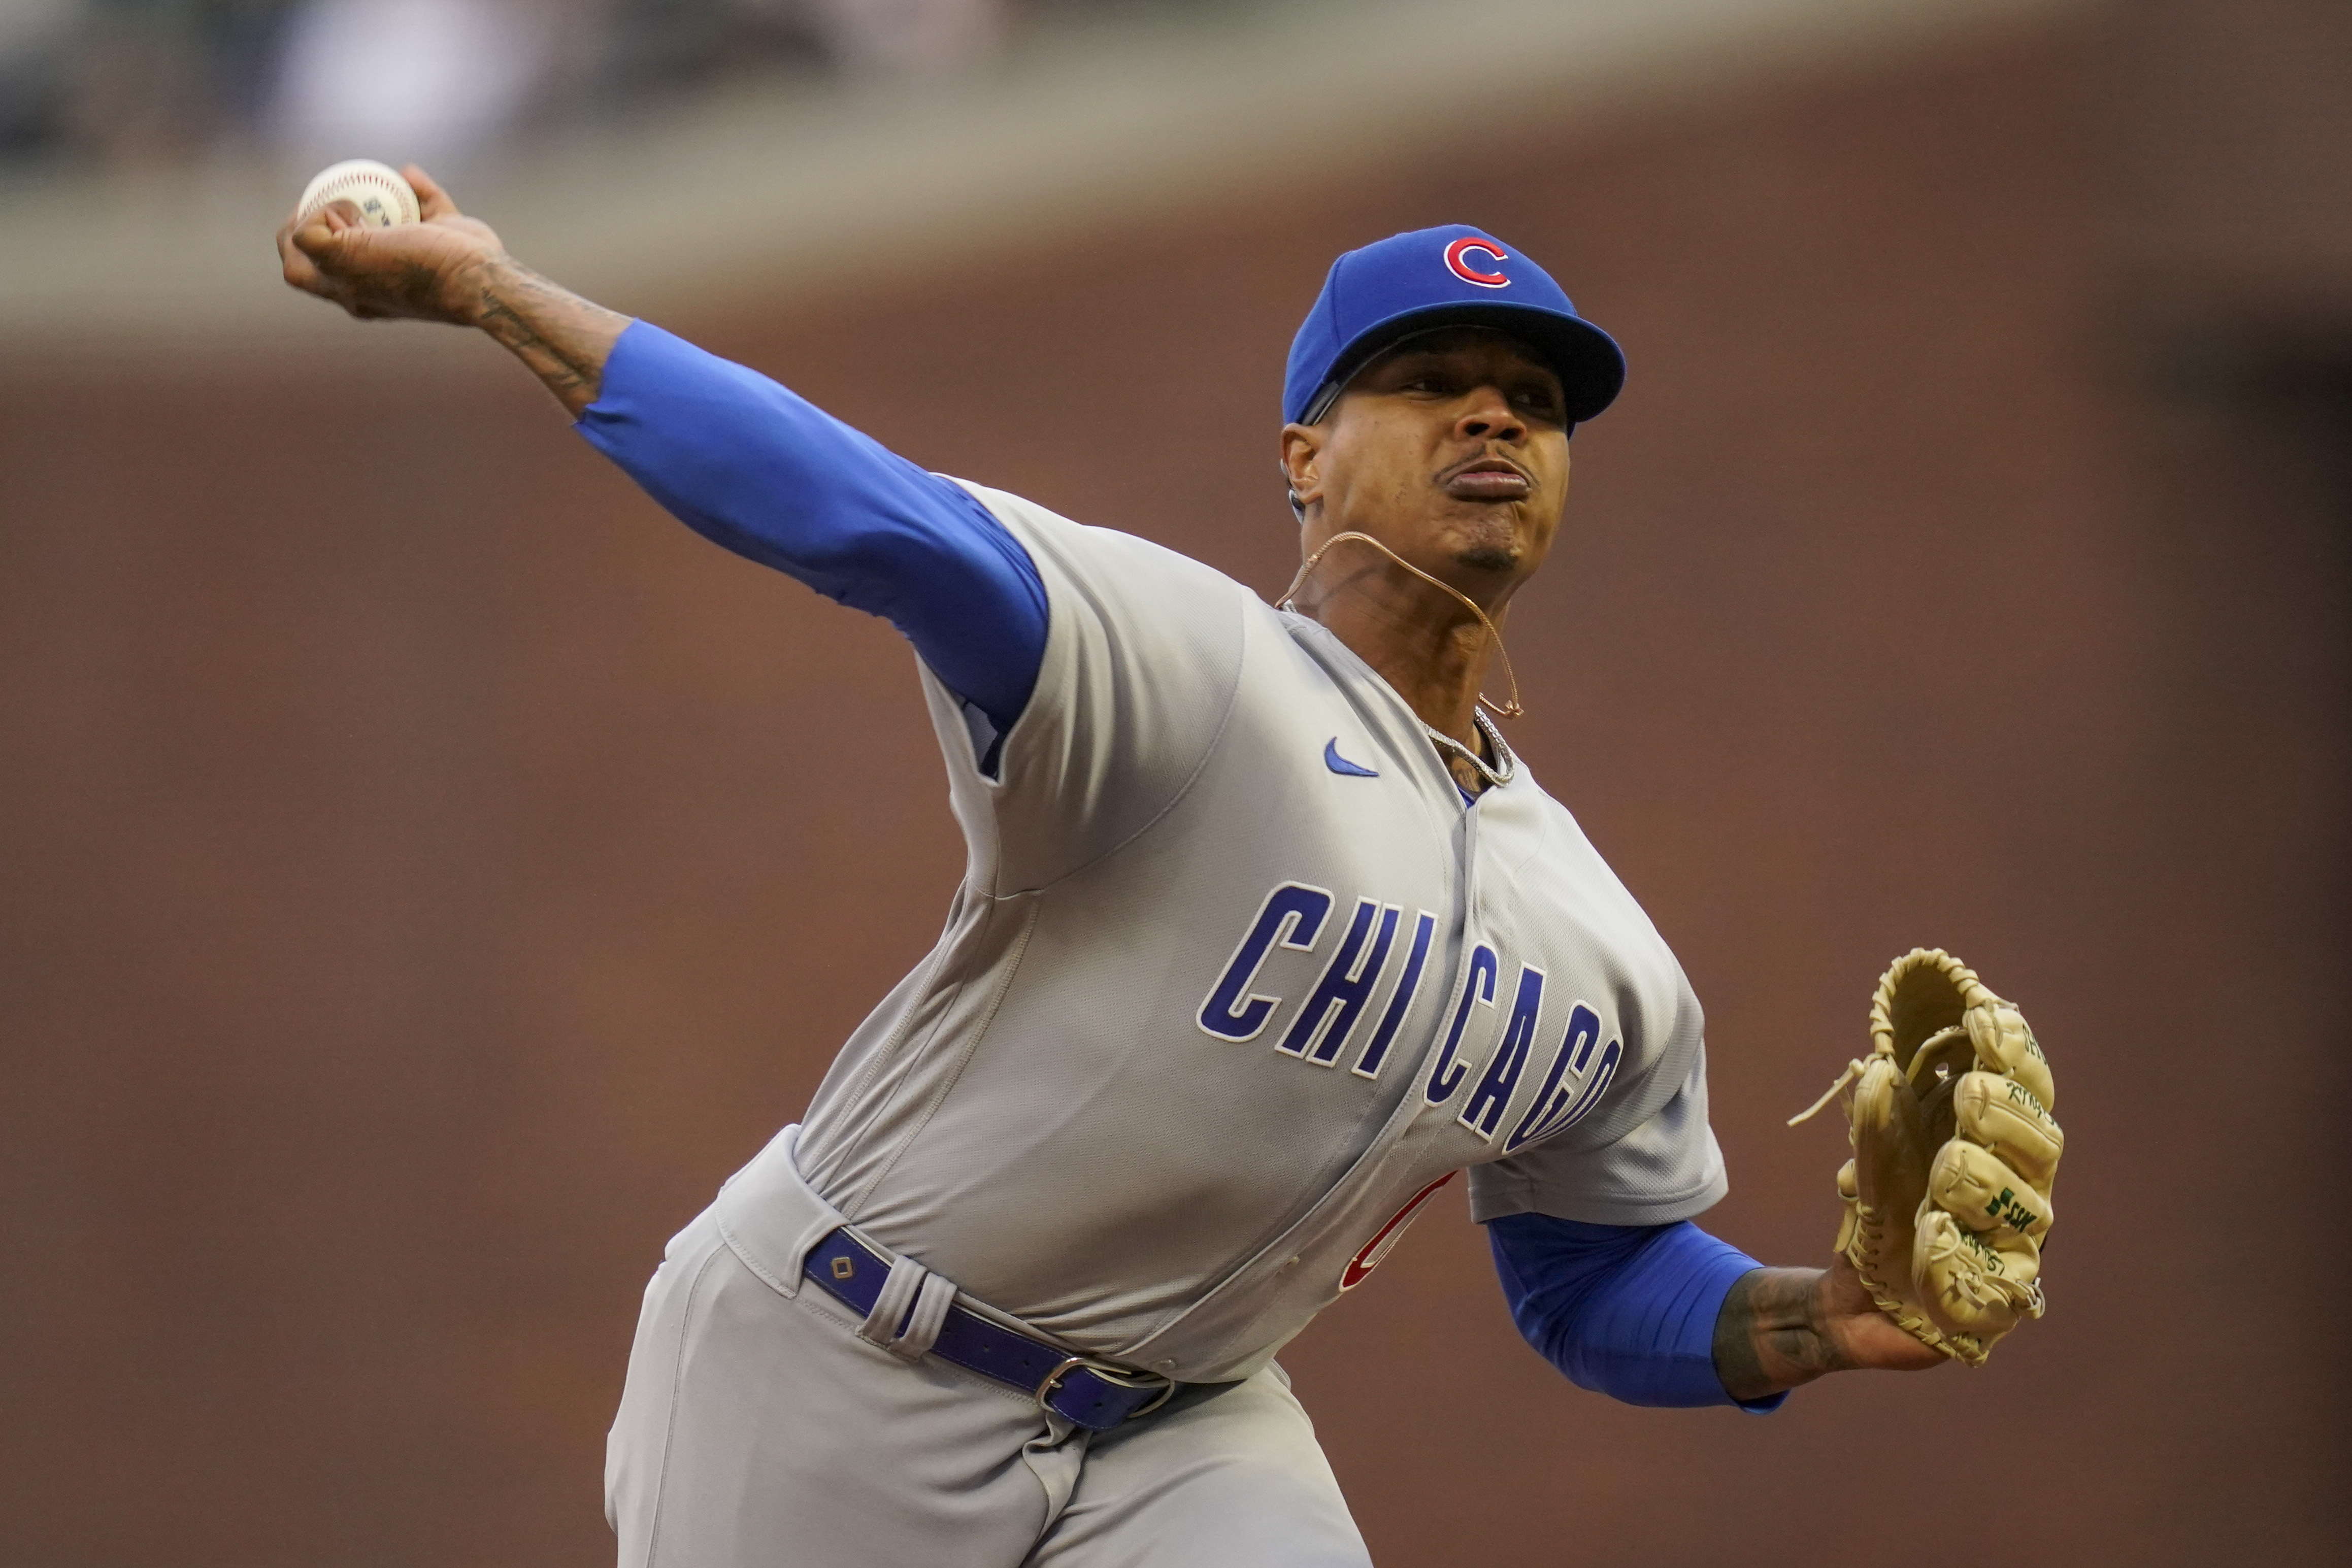 After bad news on Stroman, Morel gives Cubs needed lift